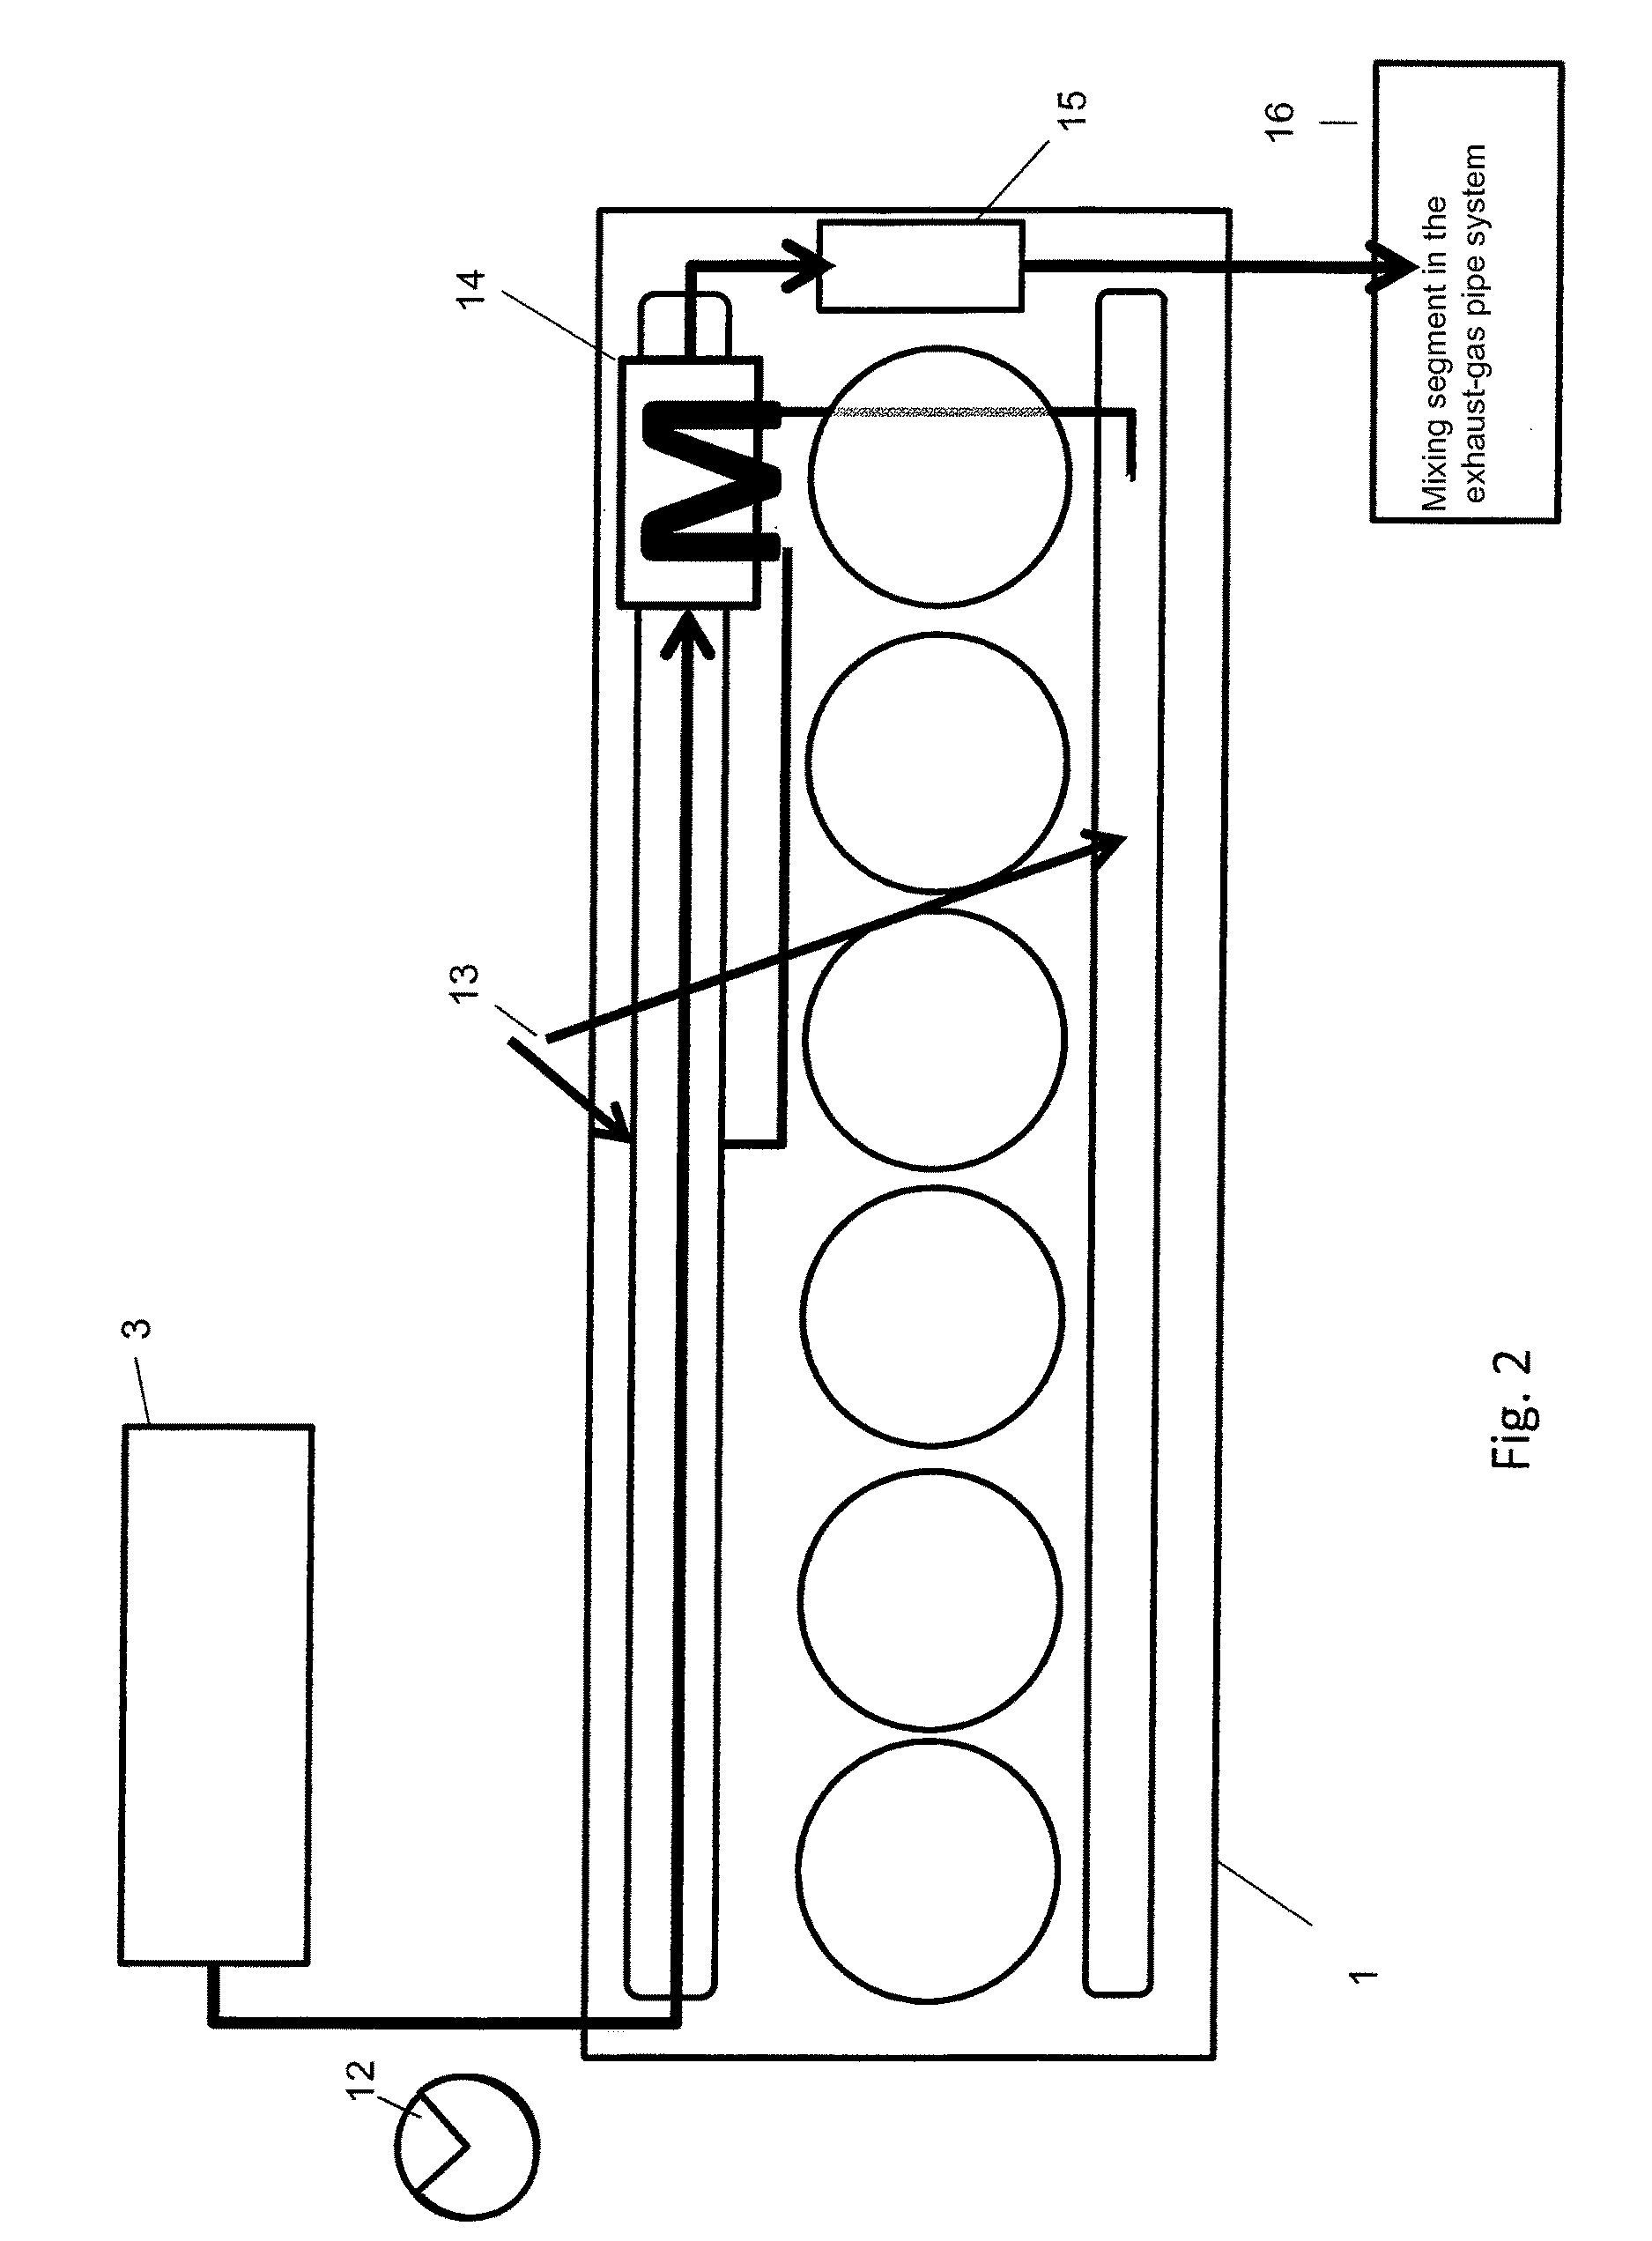 Method for the purification of diesel engine exhaust gases